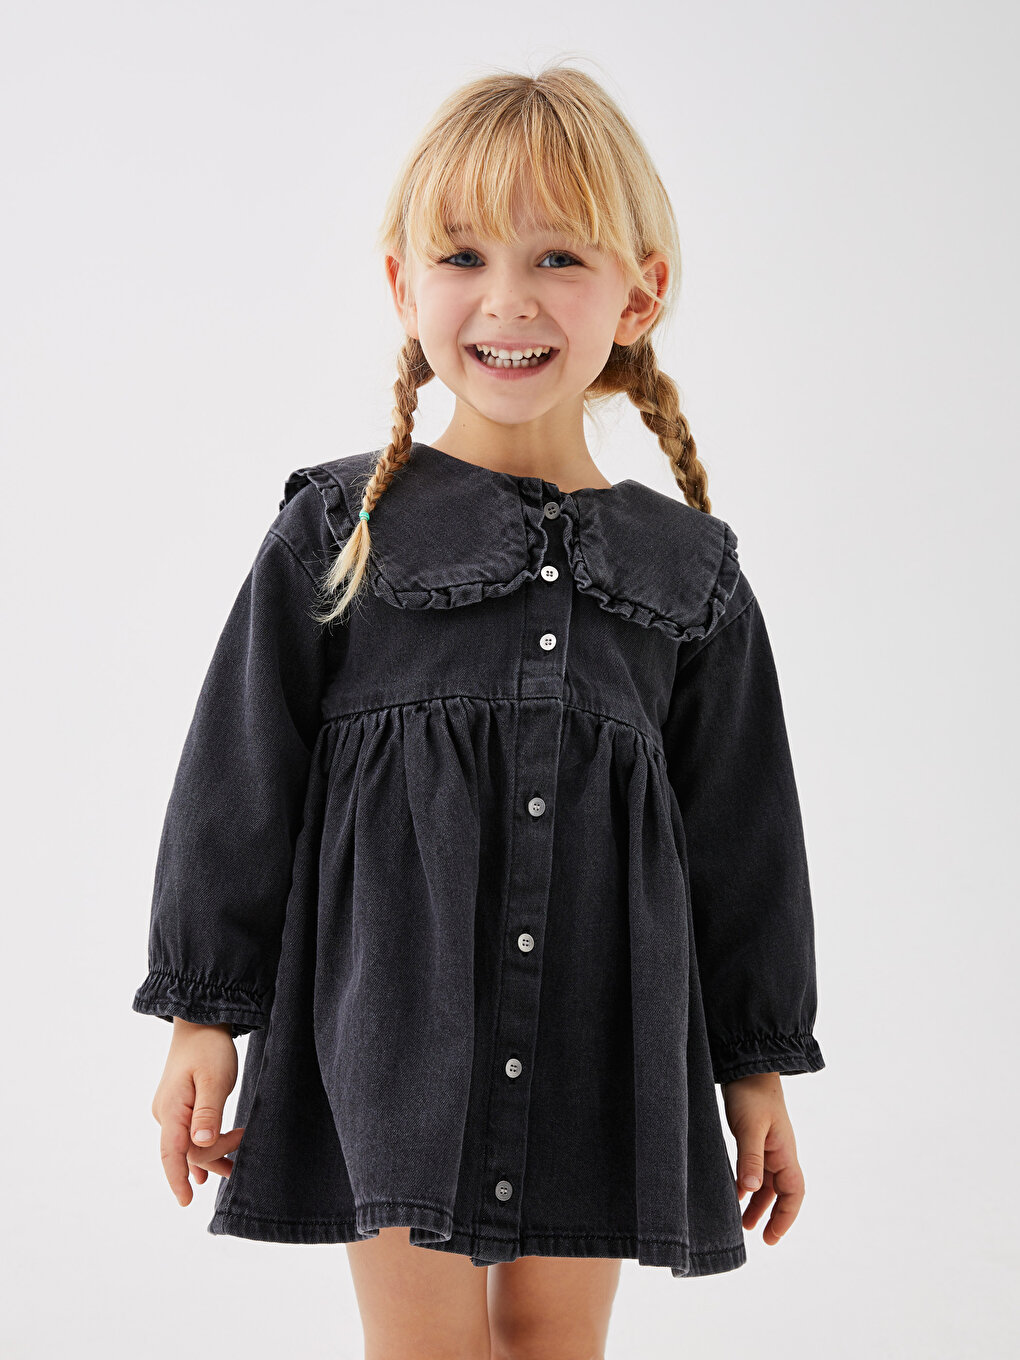 Fashion Denim Dress For Girls Toddler Kid Child Long Sleeve Ruffle Dresses  For Girl Autumn Party Princess Costumes | Unilovers